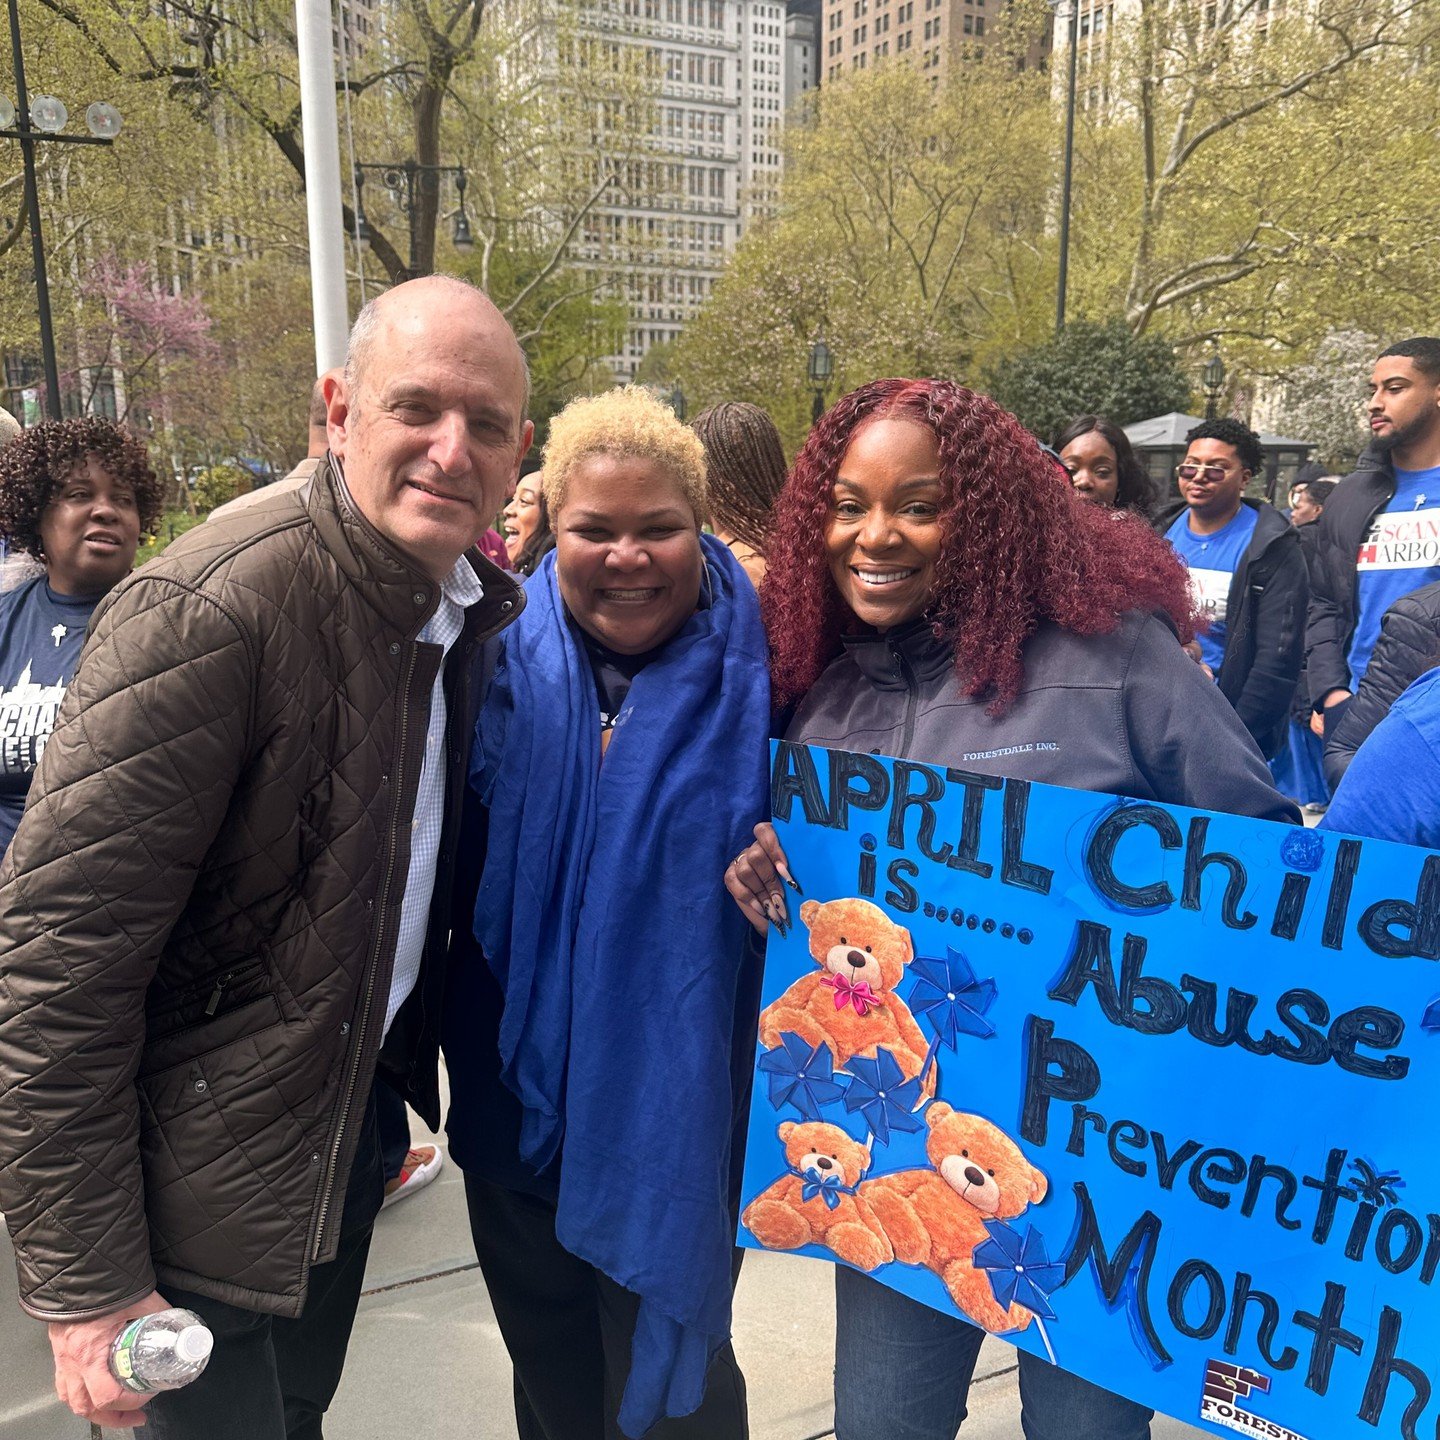 William Weisberg and Forestdale, Inc. staff with Luisa Linaras, ACS Acting Commissioner of Preventive Services, at City Hall, bringing attention to Child Abuse Prevention Month.
#childwelfare #advocate